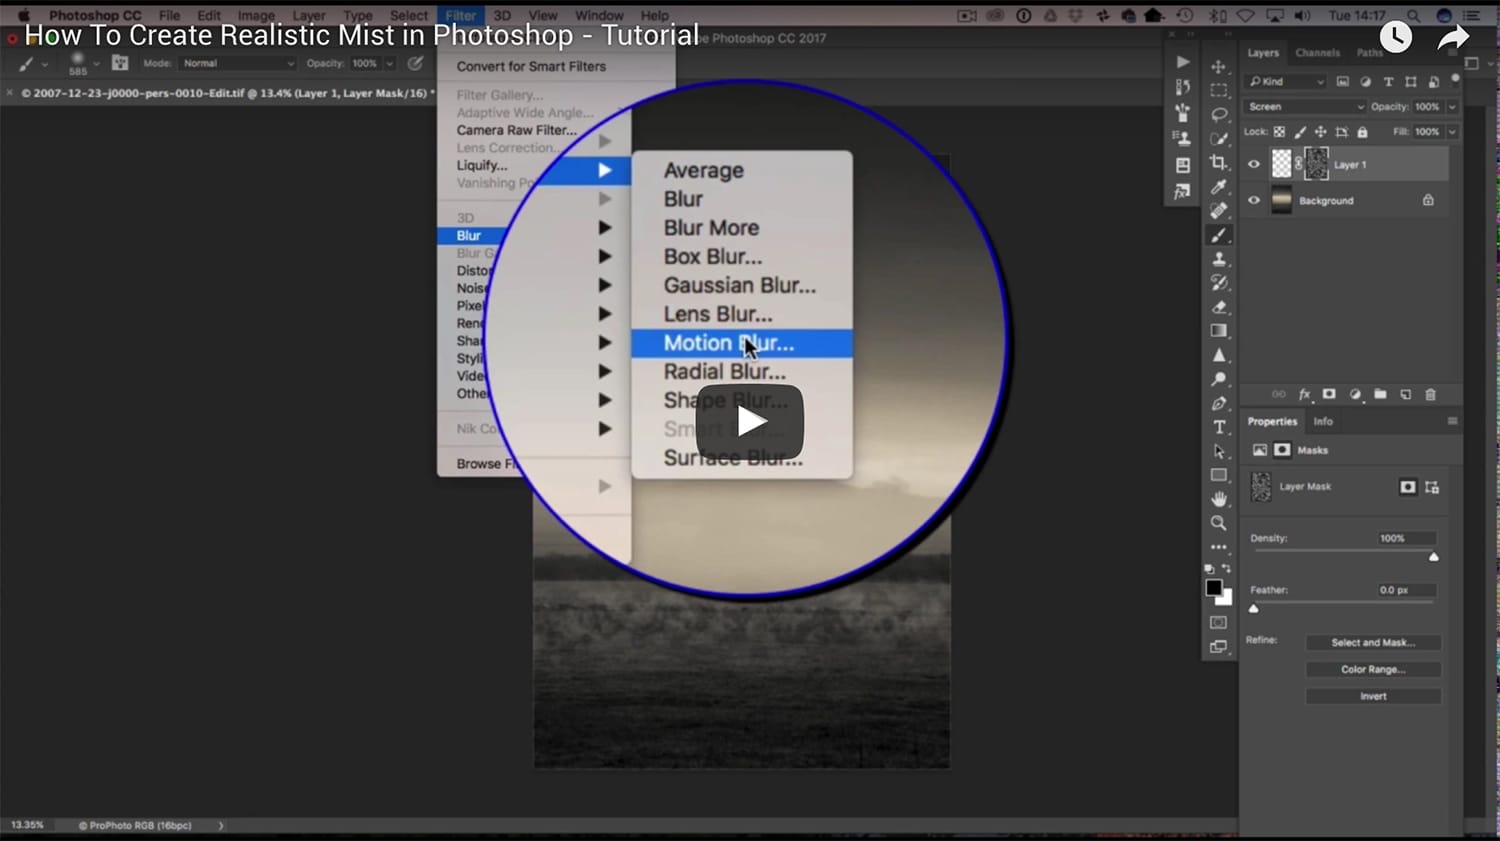 How To Create Realistic Mist in Photoshop